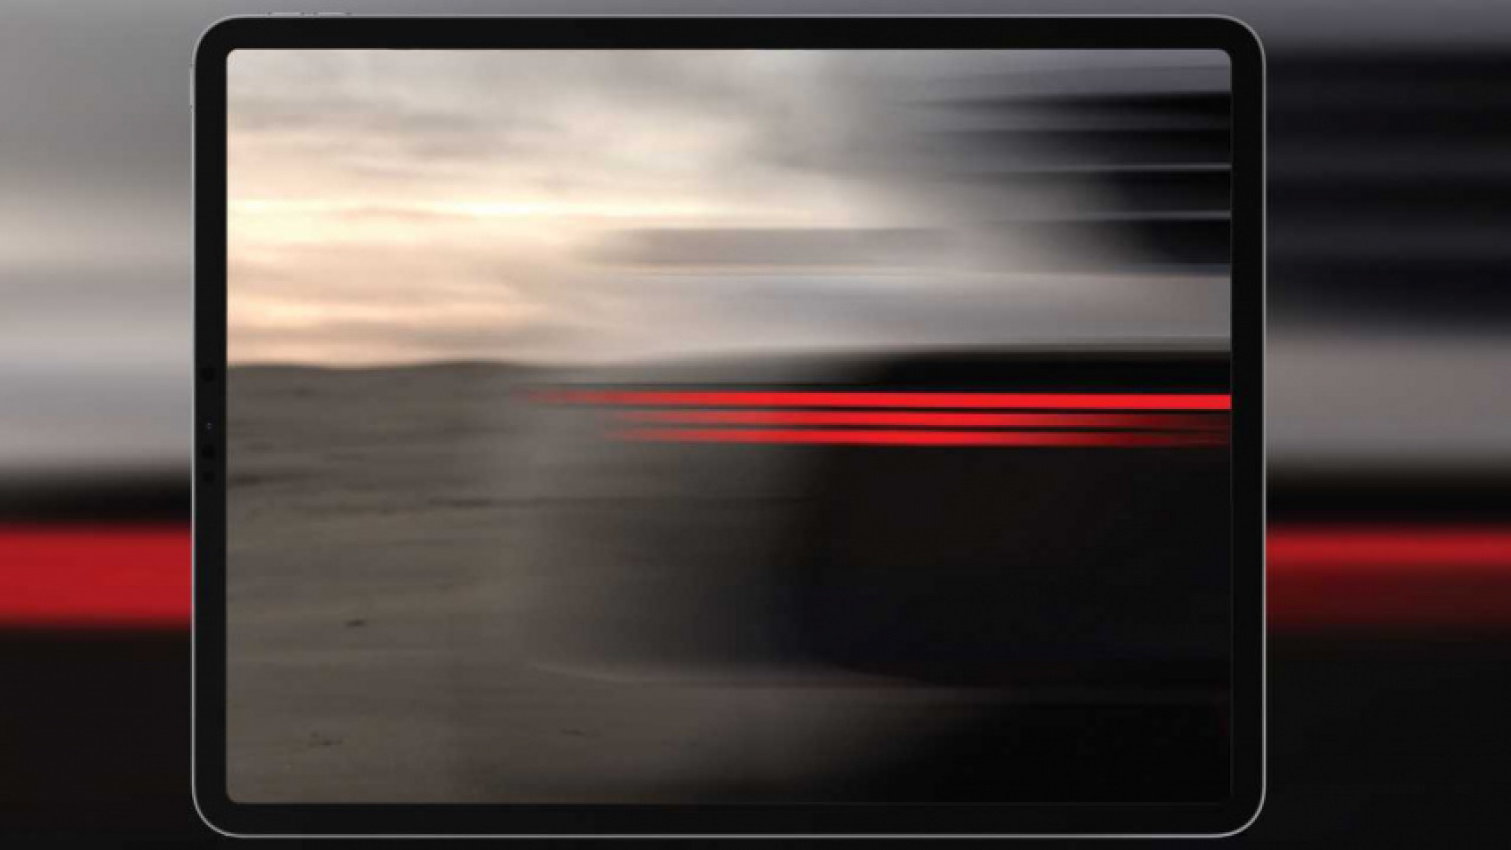 autos, cars, delorean, is this new delorean teaser image posted on april 1 the real deal?